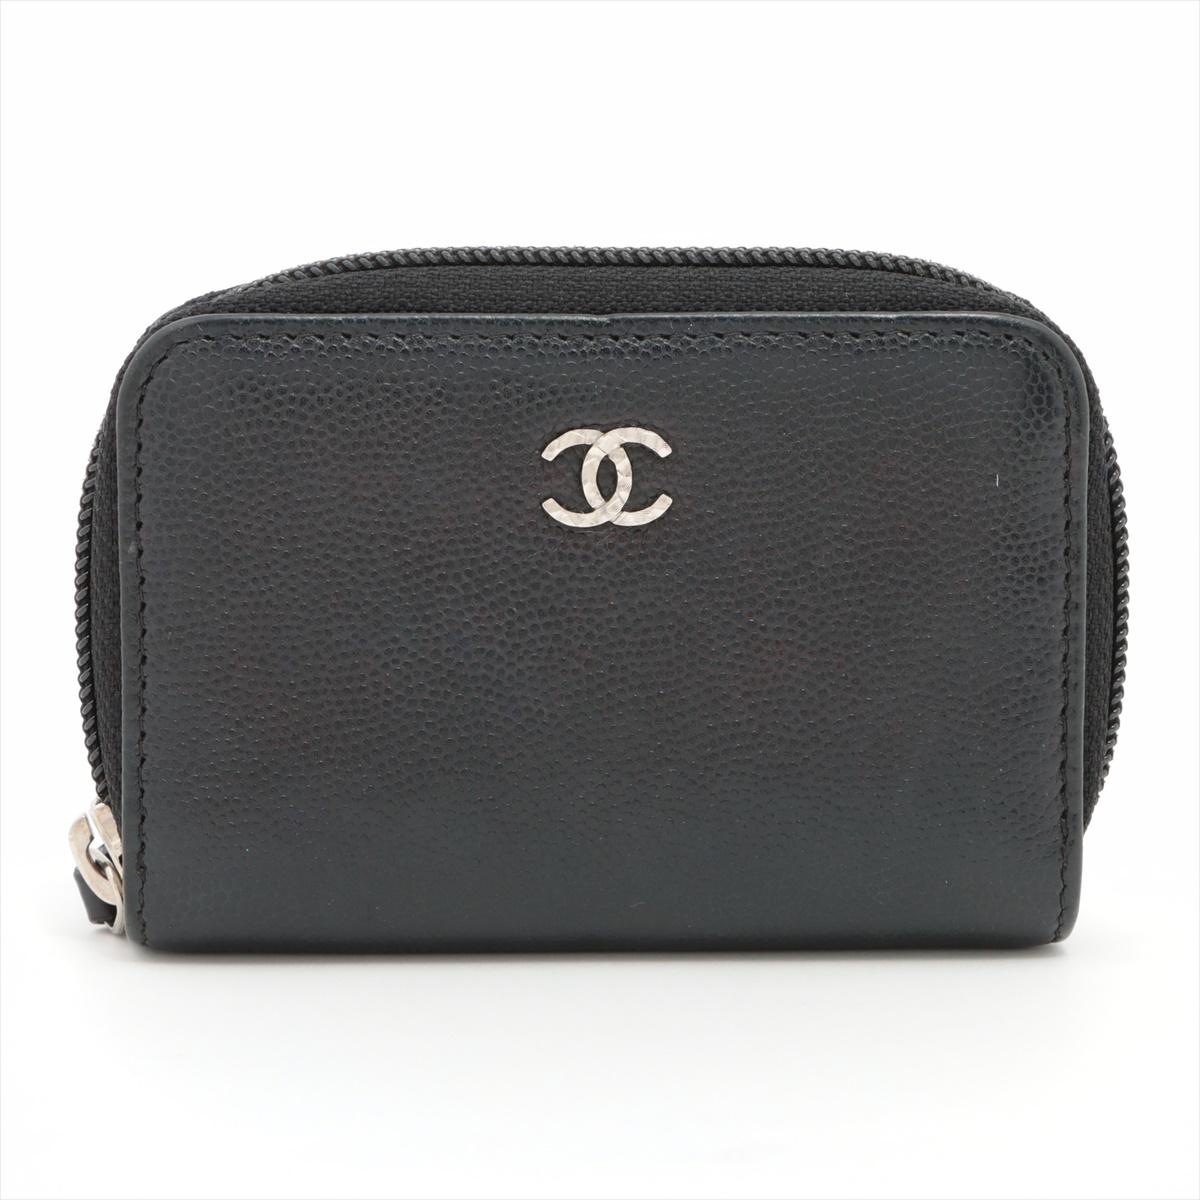 The Chanel CC Logo Caviarskin Coin Case in Black is a sophisticated and practical accessory that exemplifies Chanel's timeless elegance and meticulous craftsmanship. Meticulously crafted from caviarskin, a textured and durable leather associated